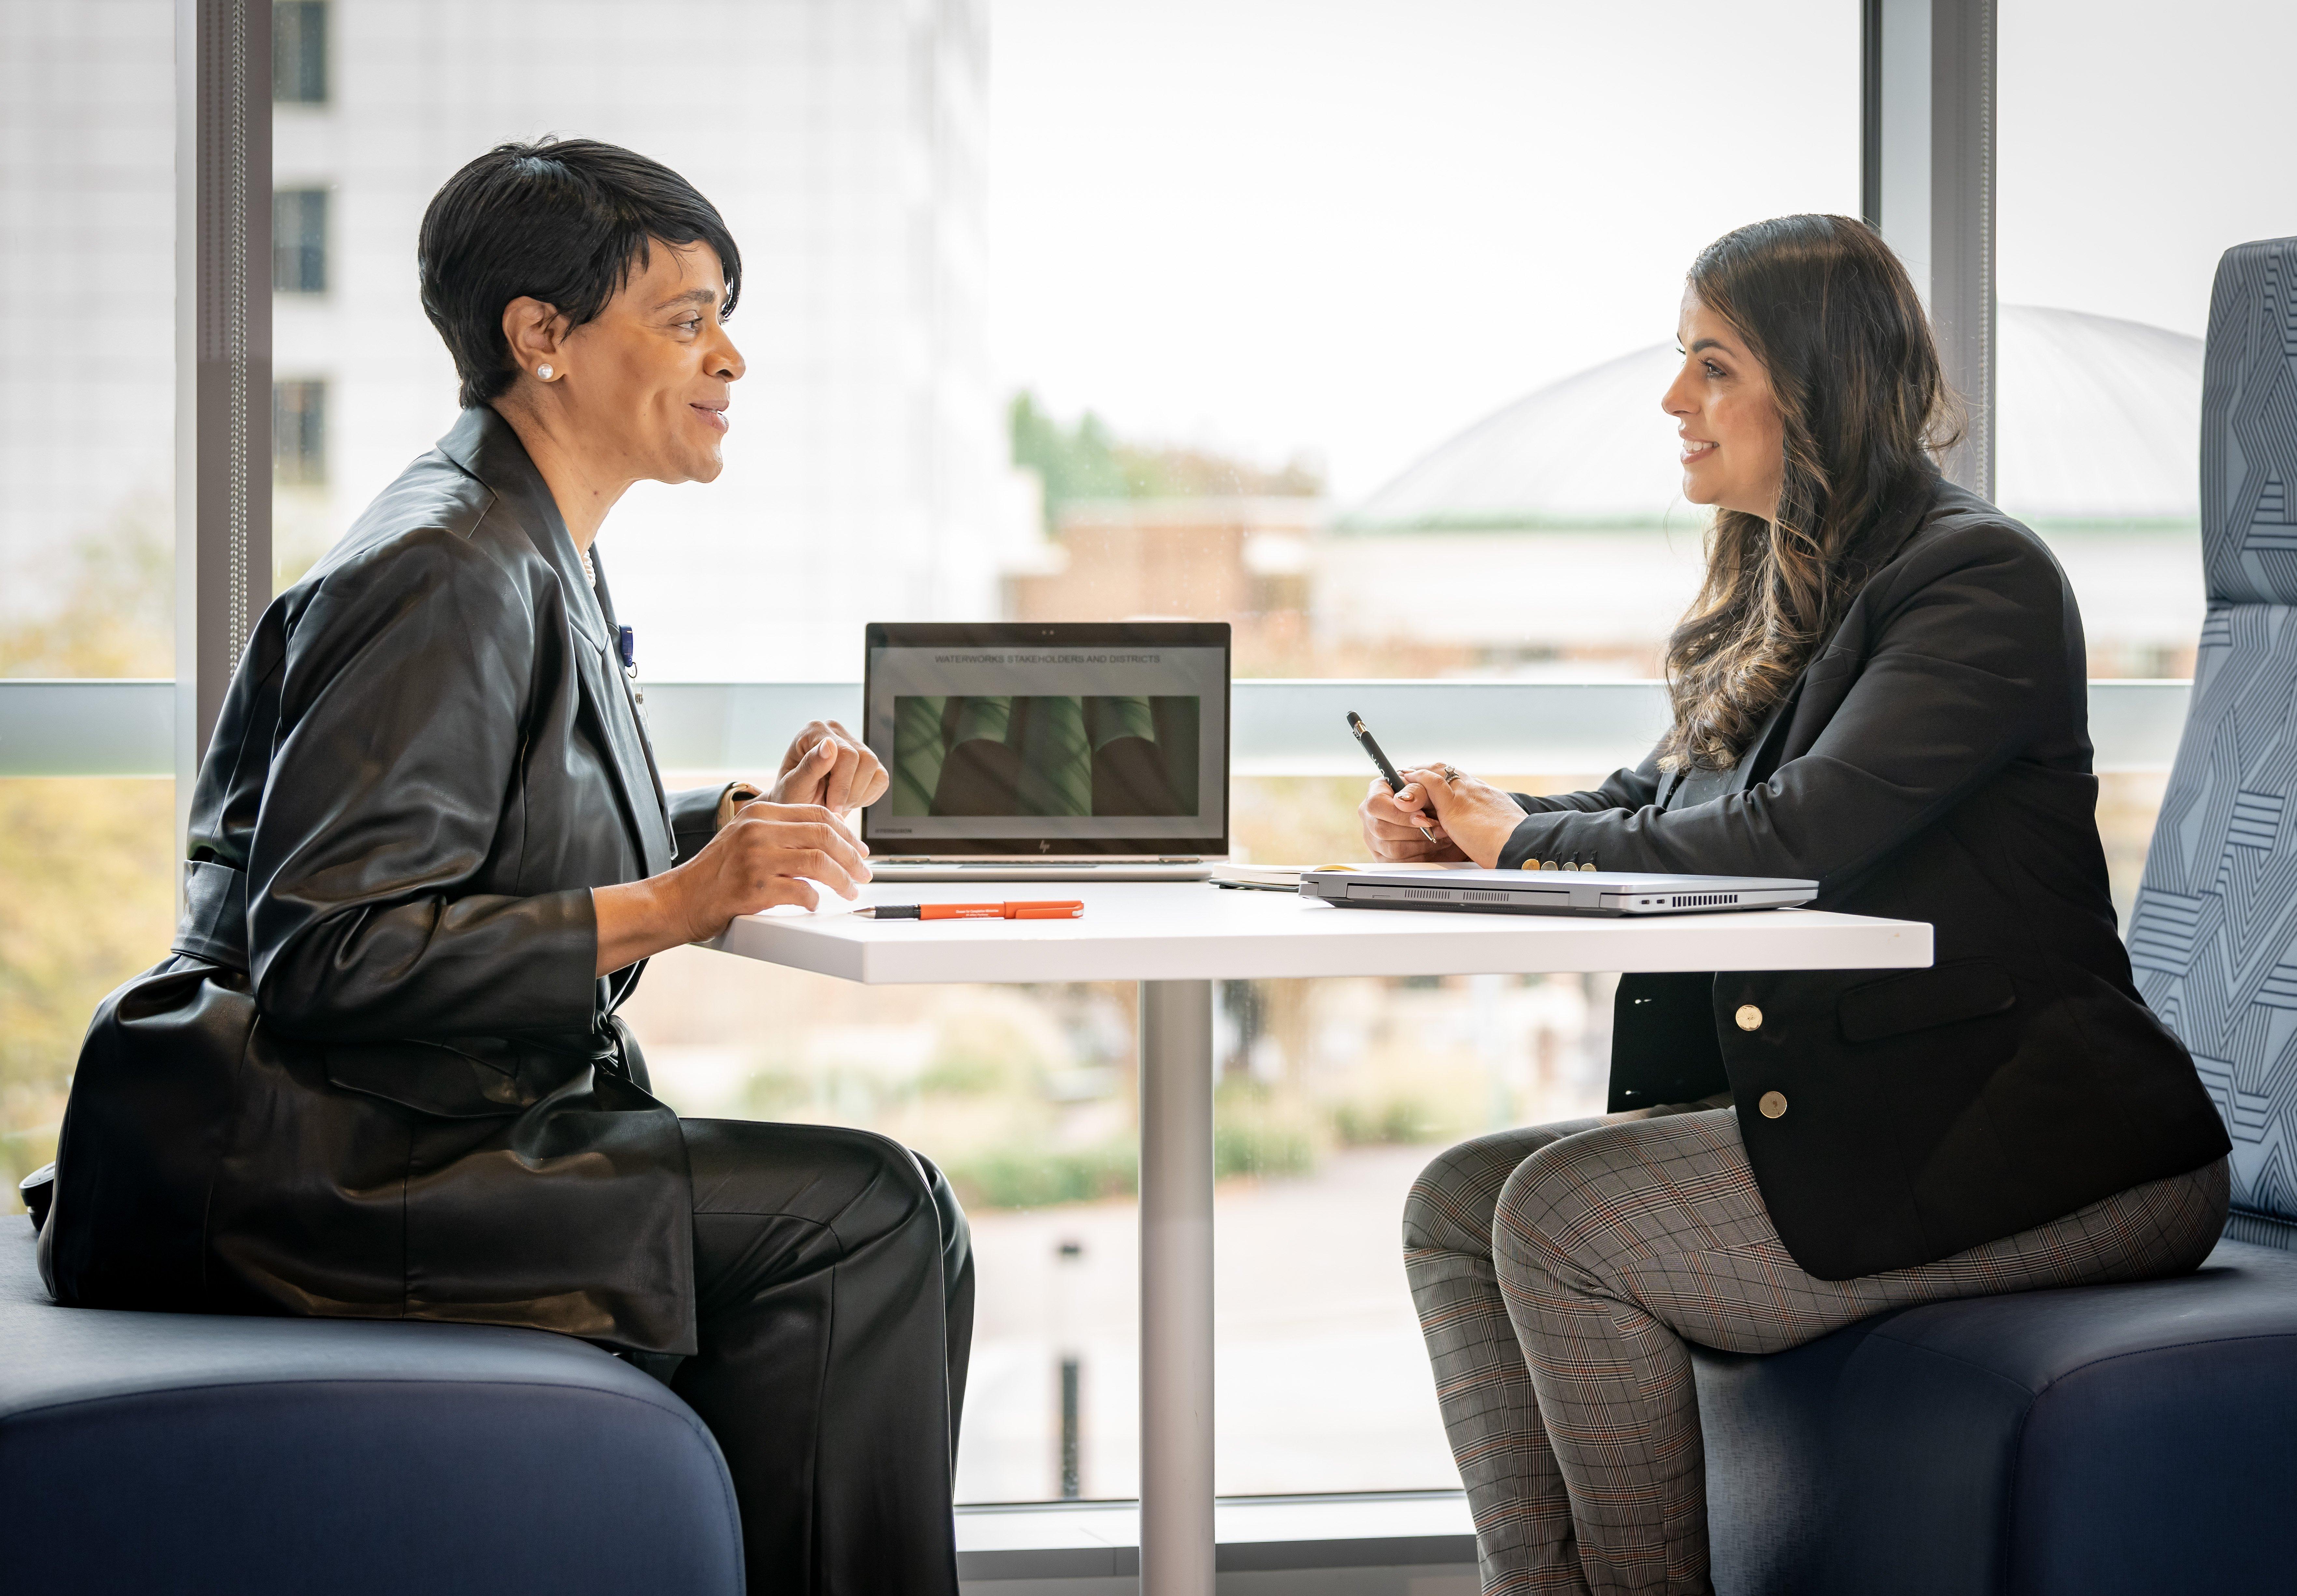 Two women in professional clothing talk with each other at a table with two laptops and notepads.